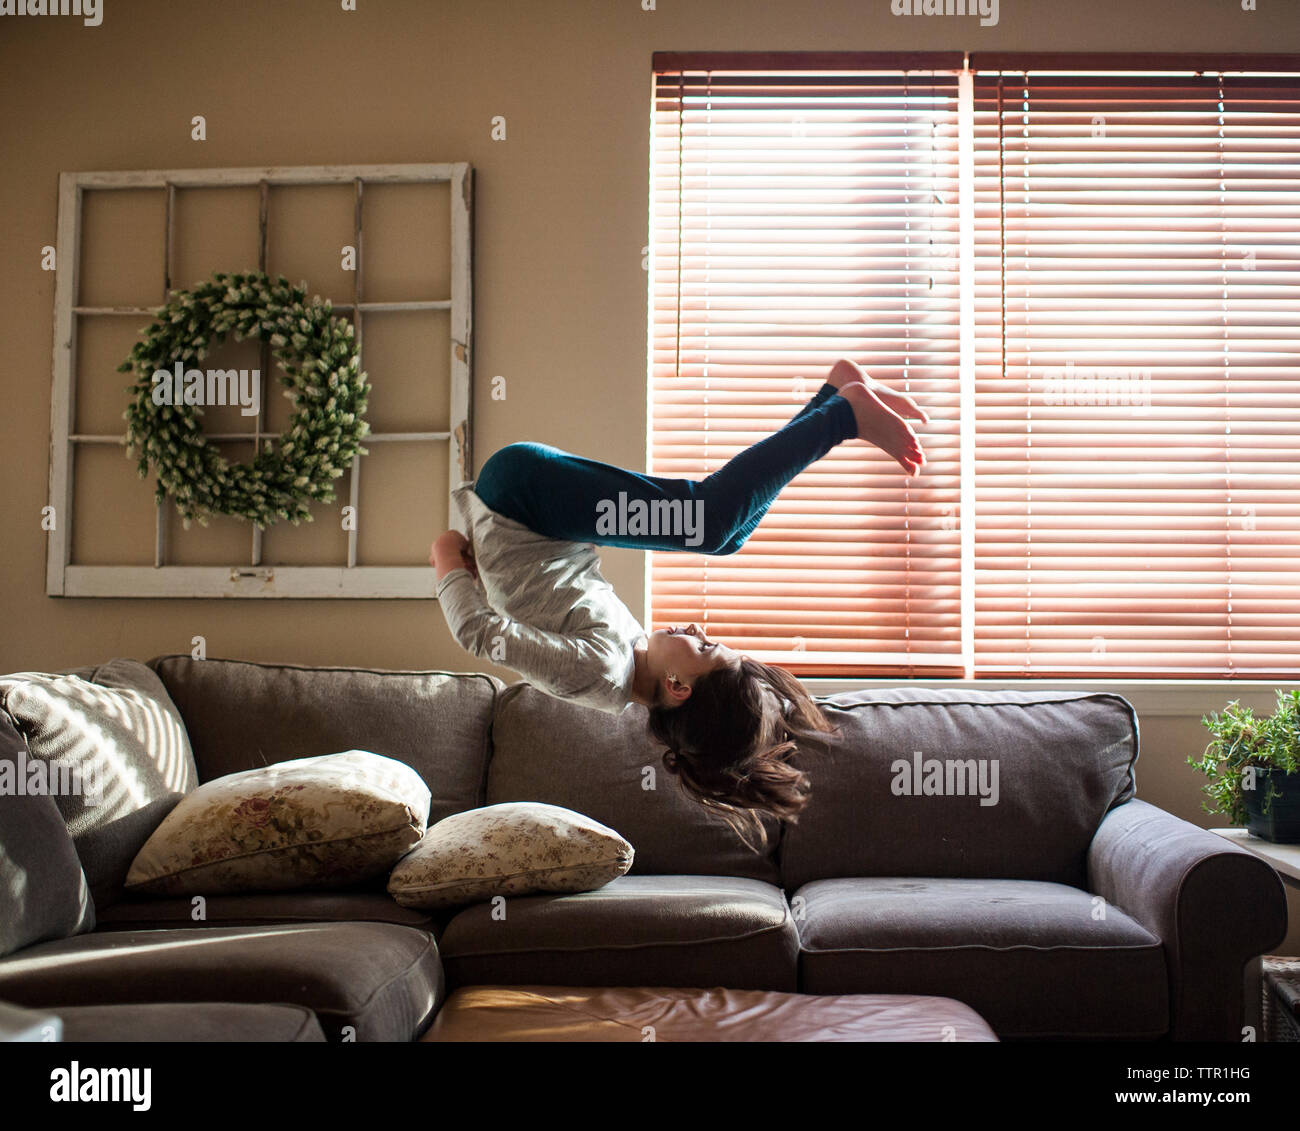 Full length of girl backflipping on couch at home Stock Photo